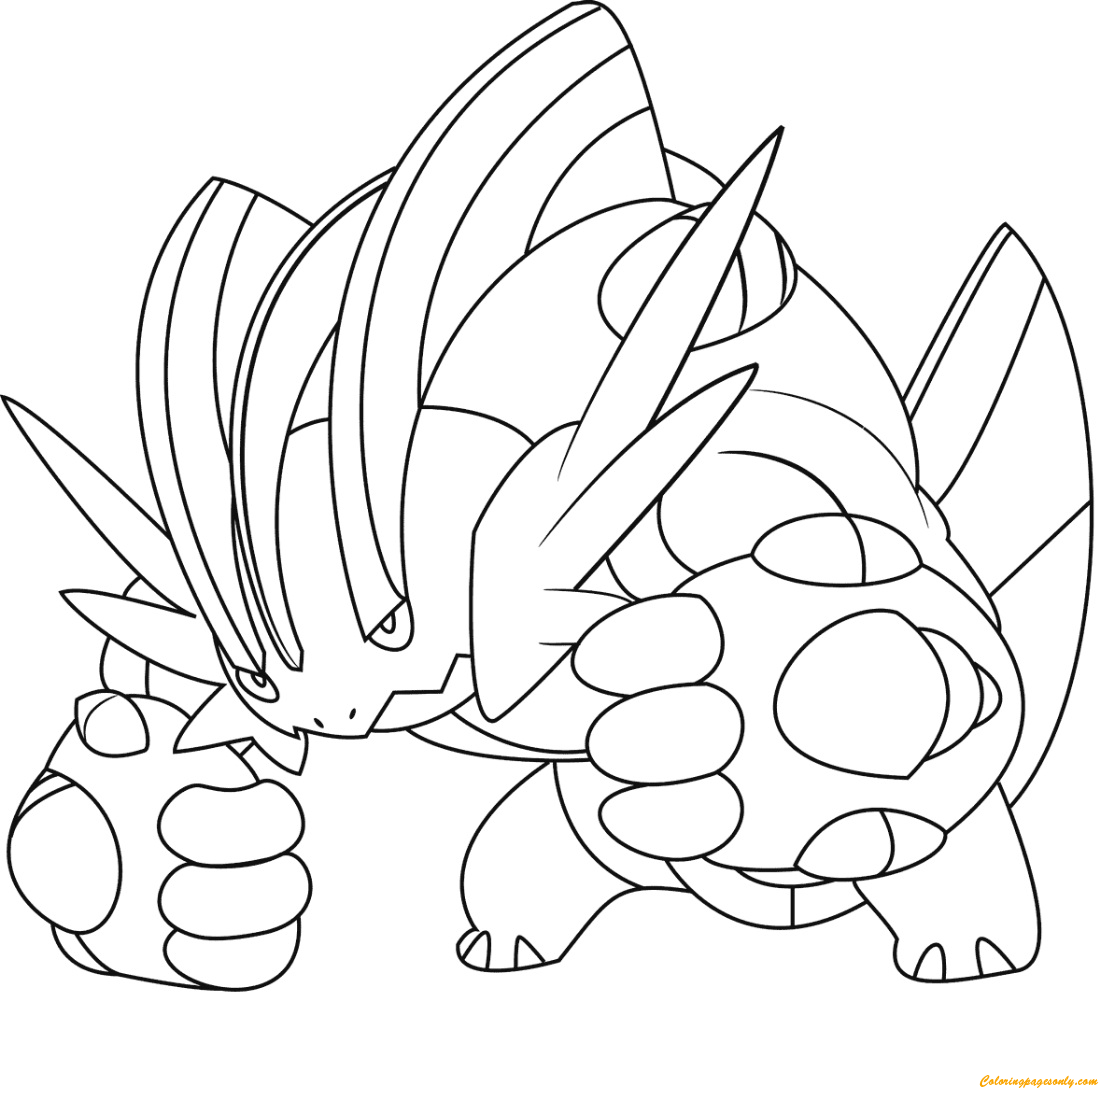 Mega Swampert From Pokemon Coloring Page